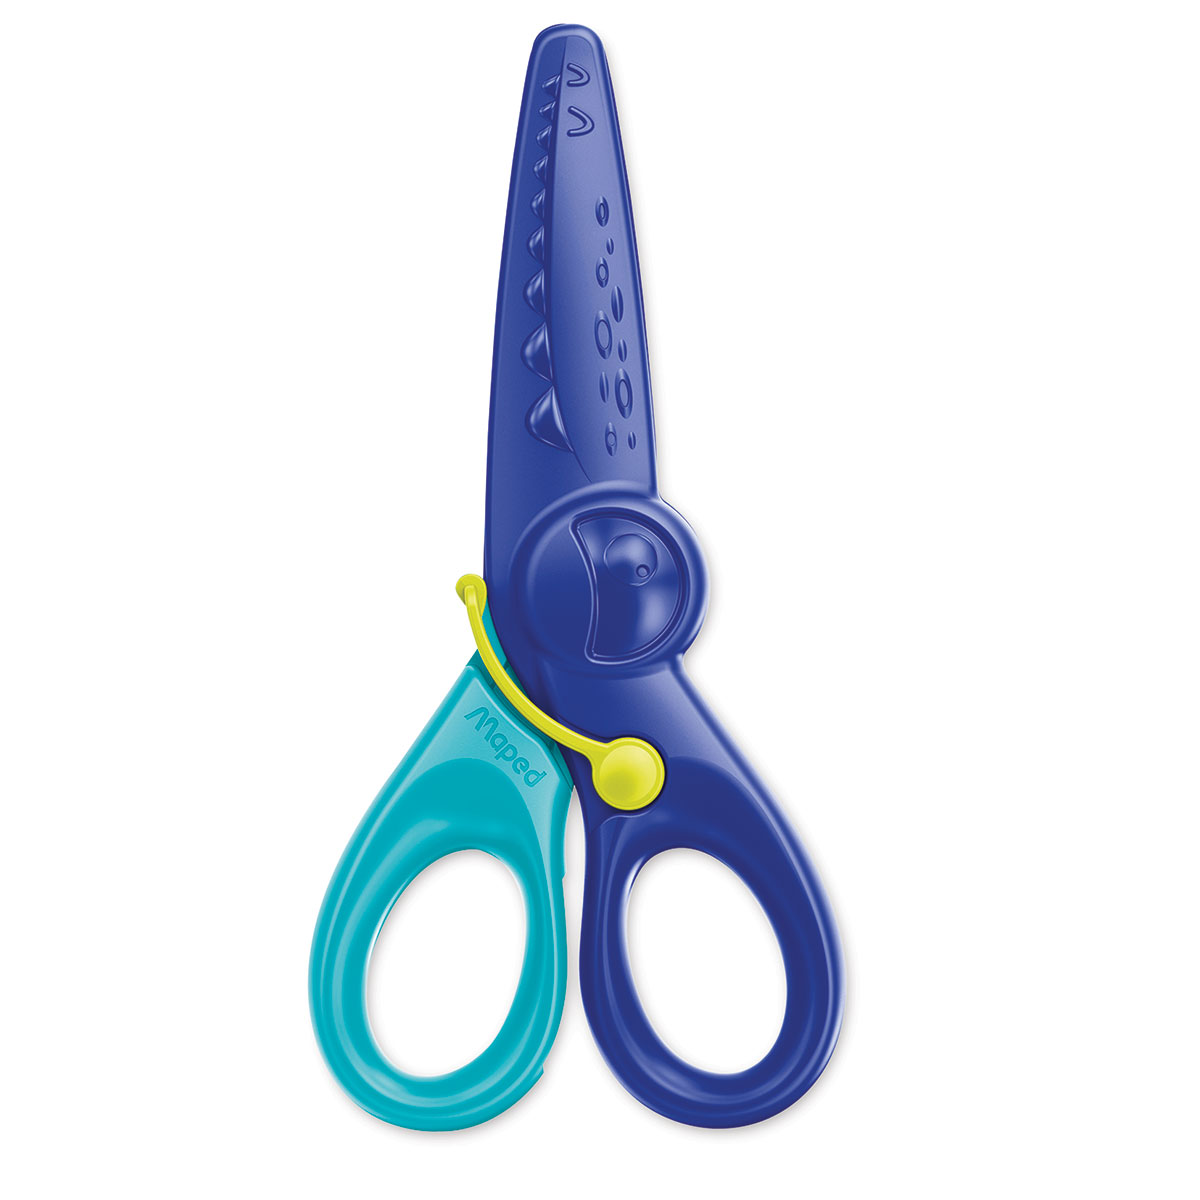 Maped 5 Koopy Scissors with Spring